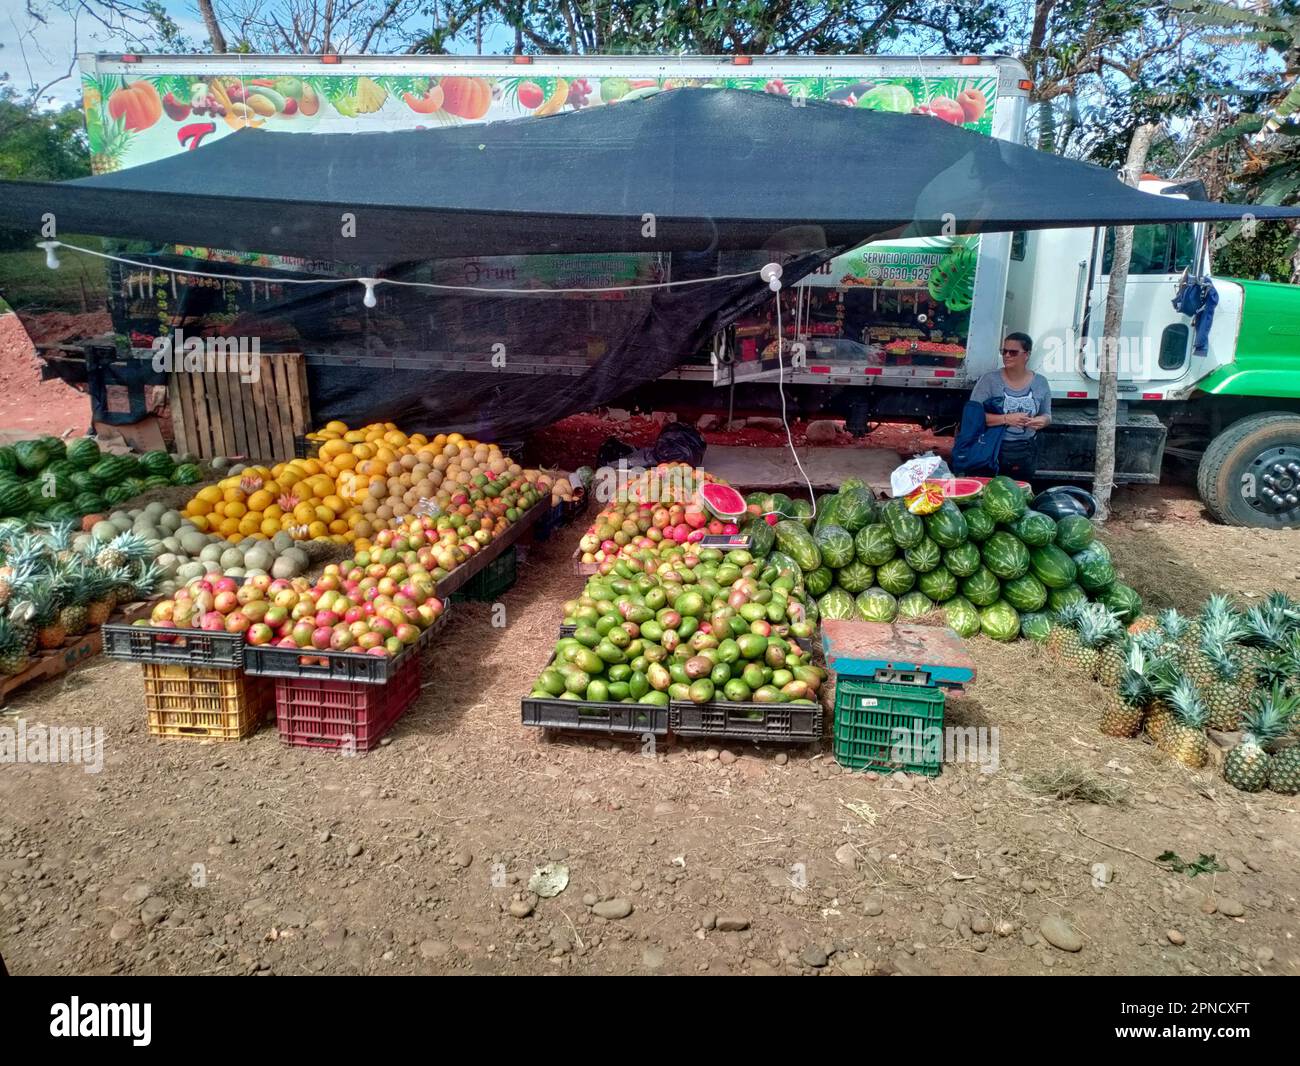 Muelle San Carlos, Costa Rica - A fruit stand alongside a rural road. Stock Photo